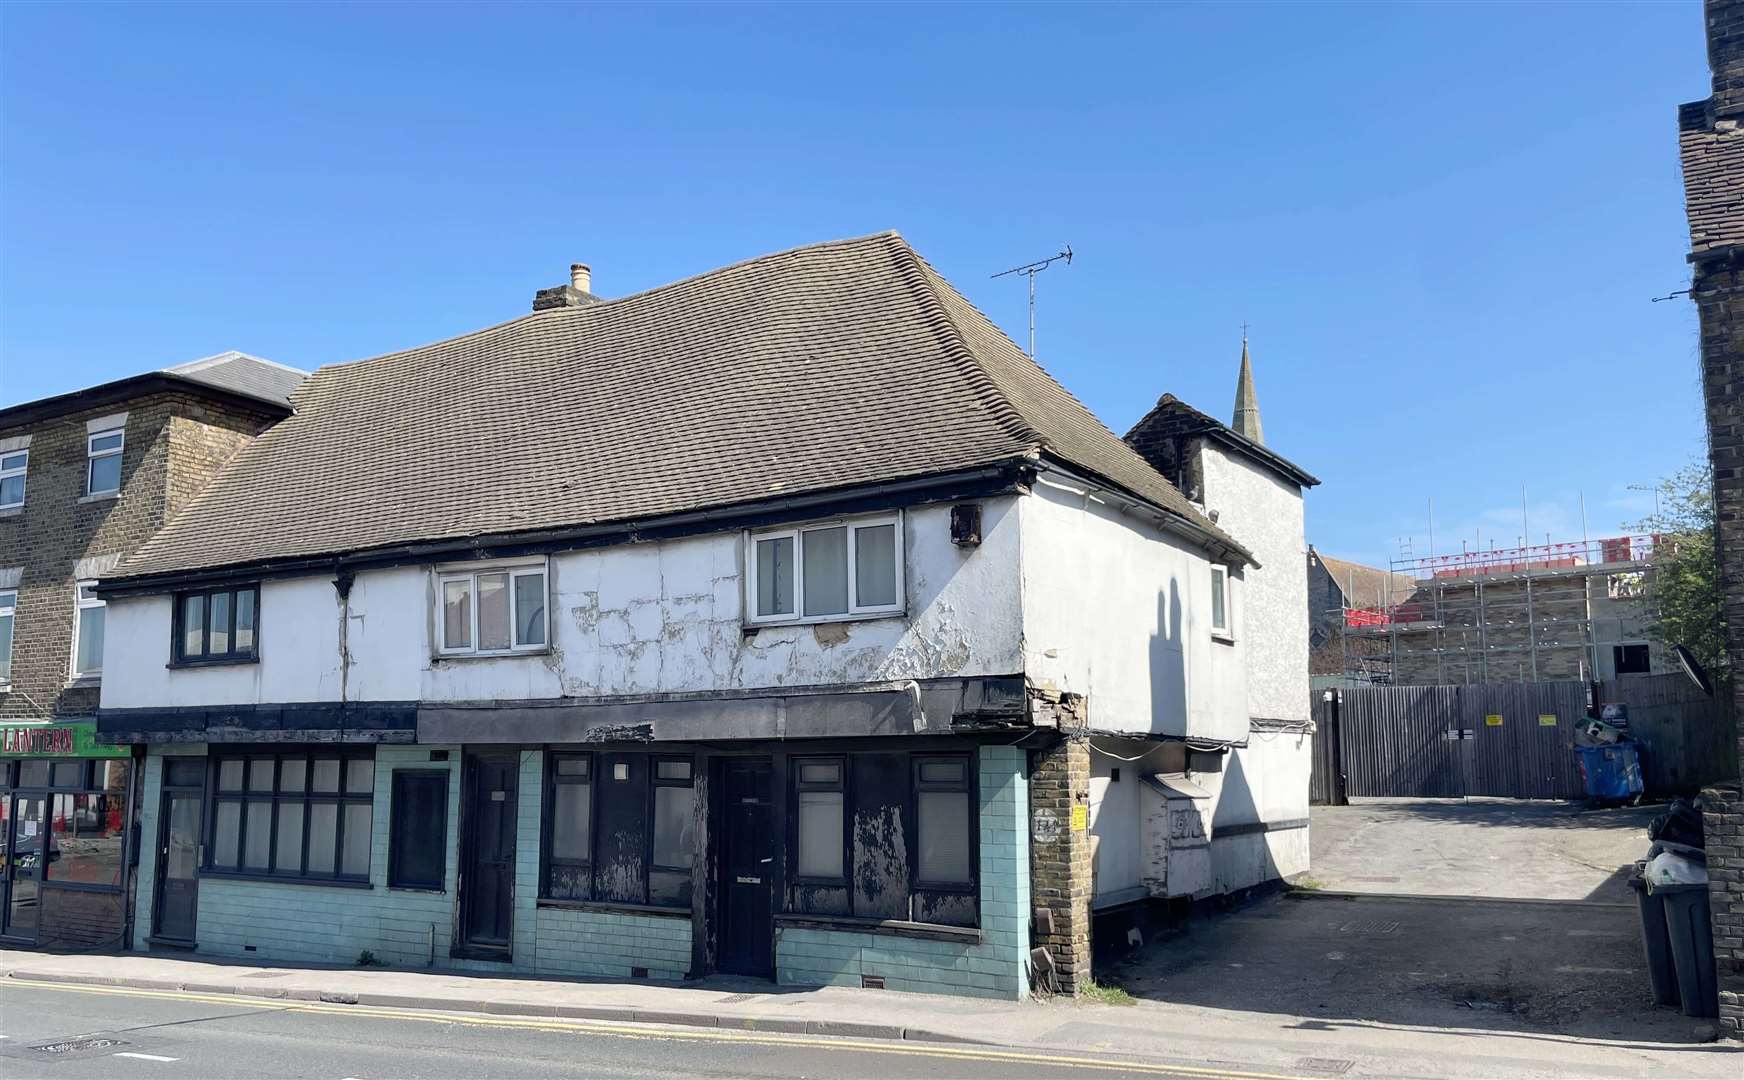 Up for sale at auction: 139 to 141 Upper Stone Street, Maidstone